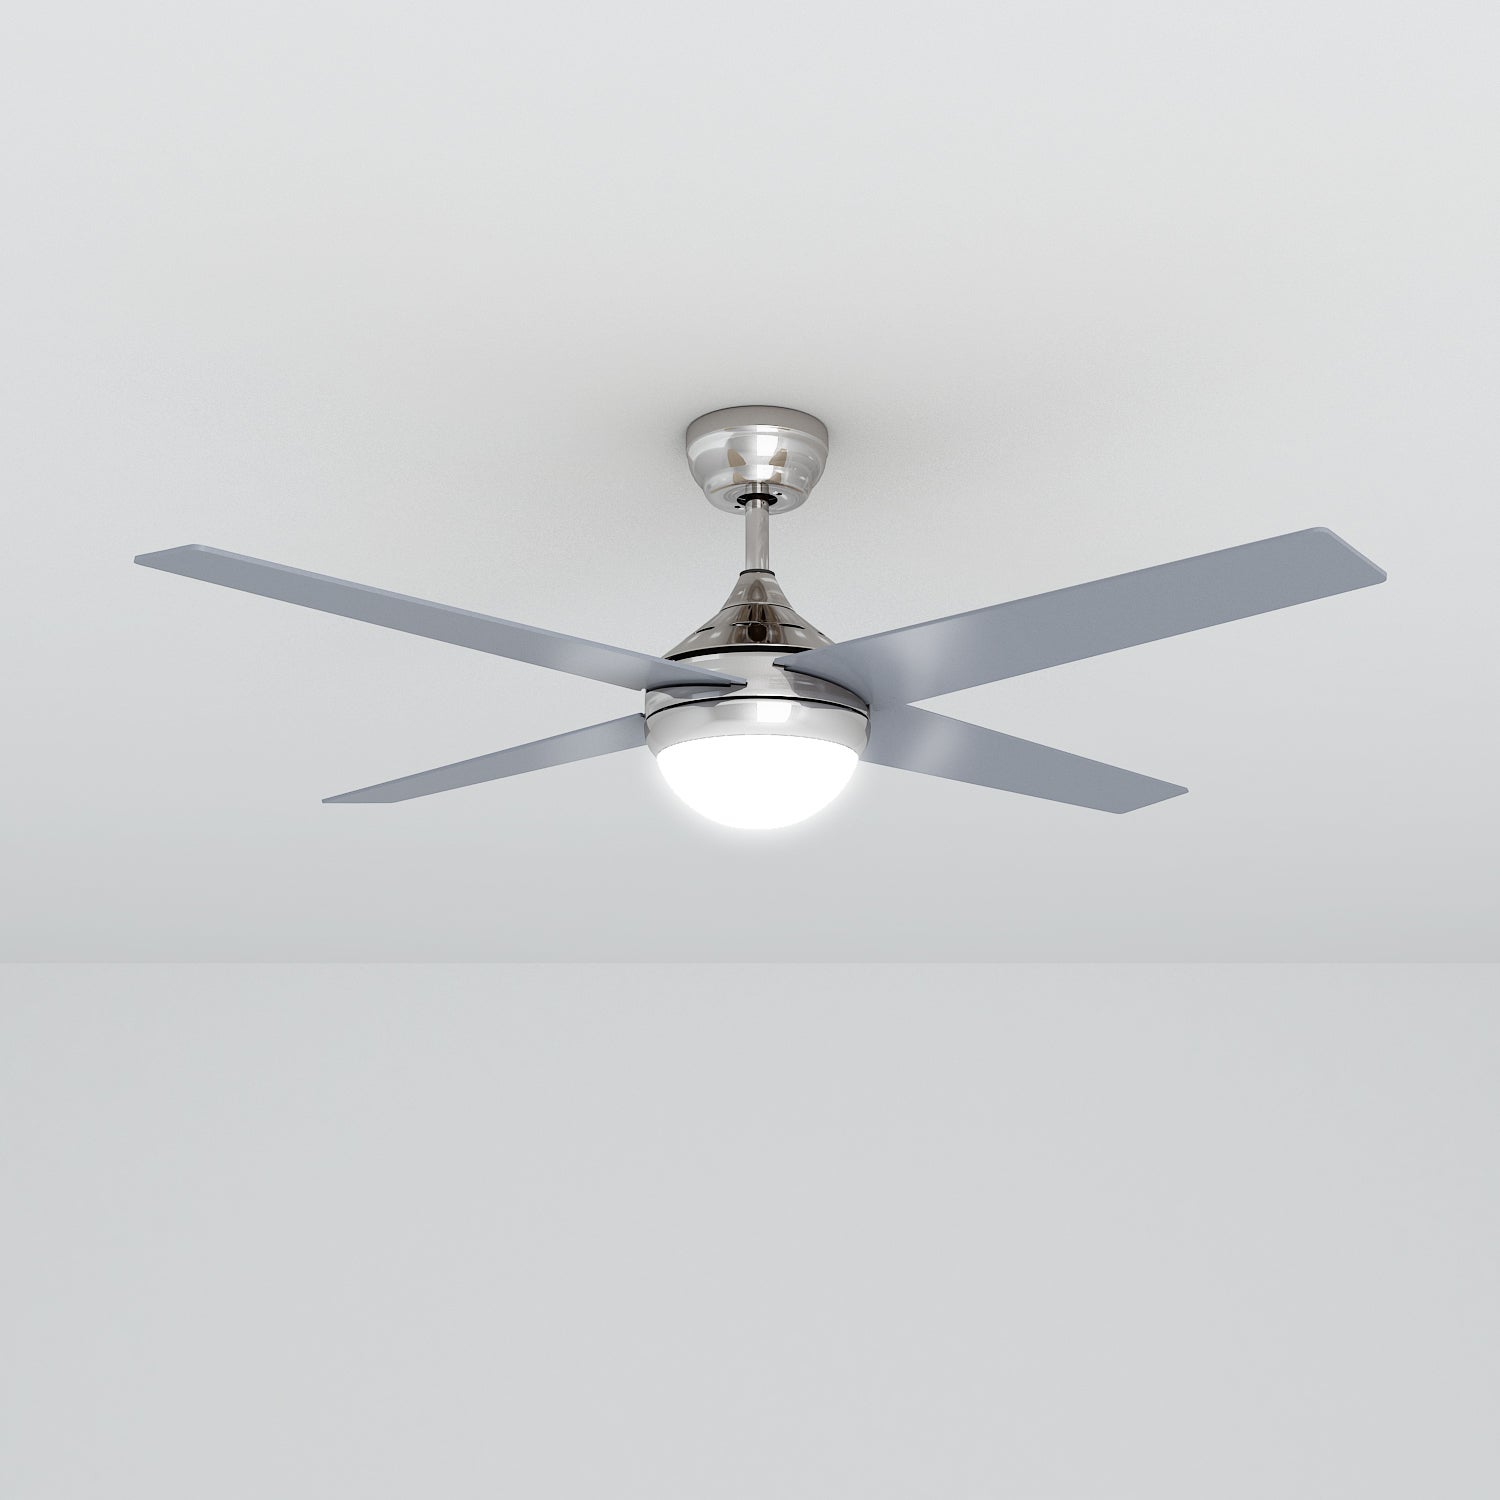 ELEGANT Ceiling Fan With Remote Control Wood Blade Changable LED Light Mute Indoor